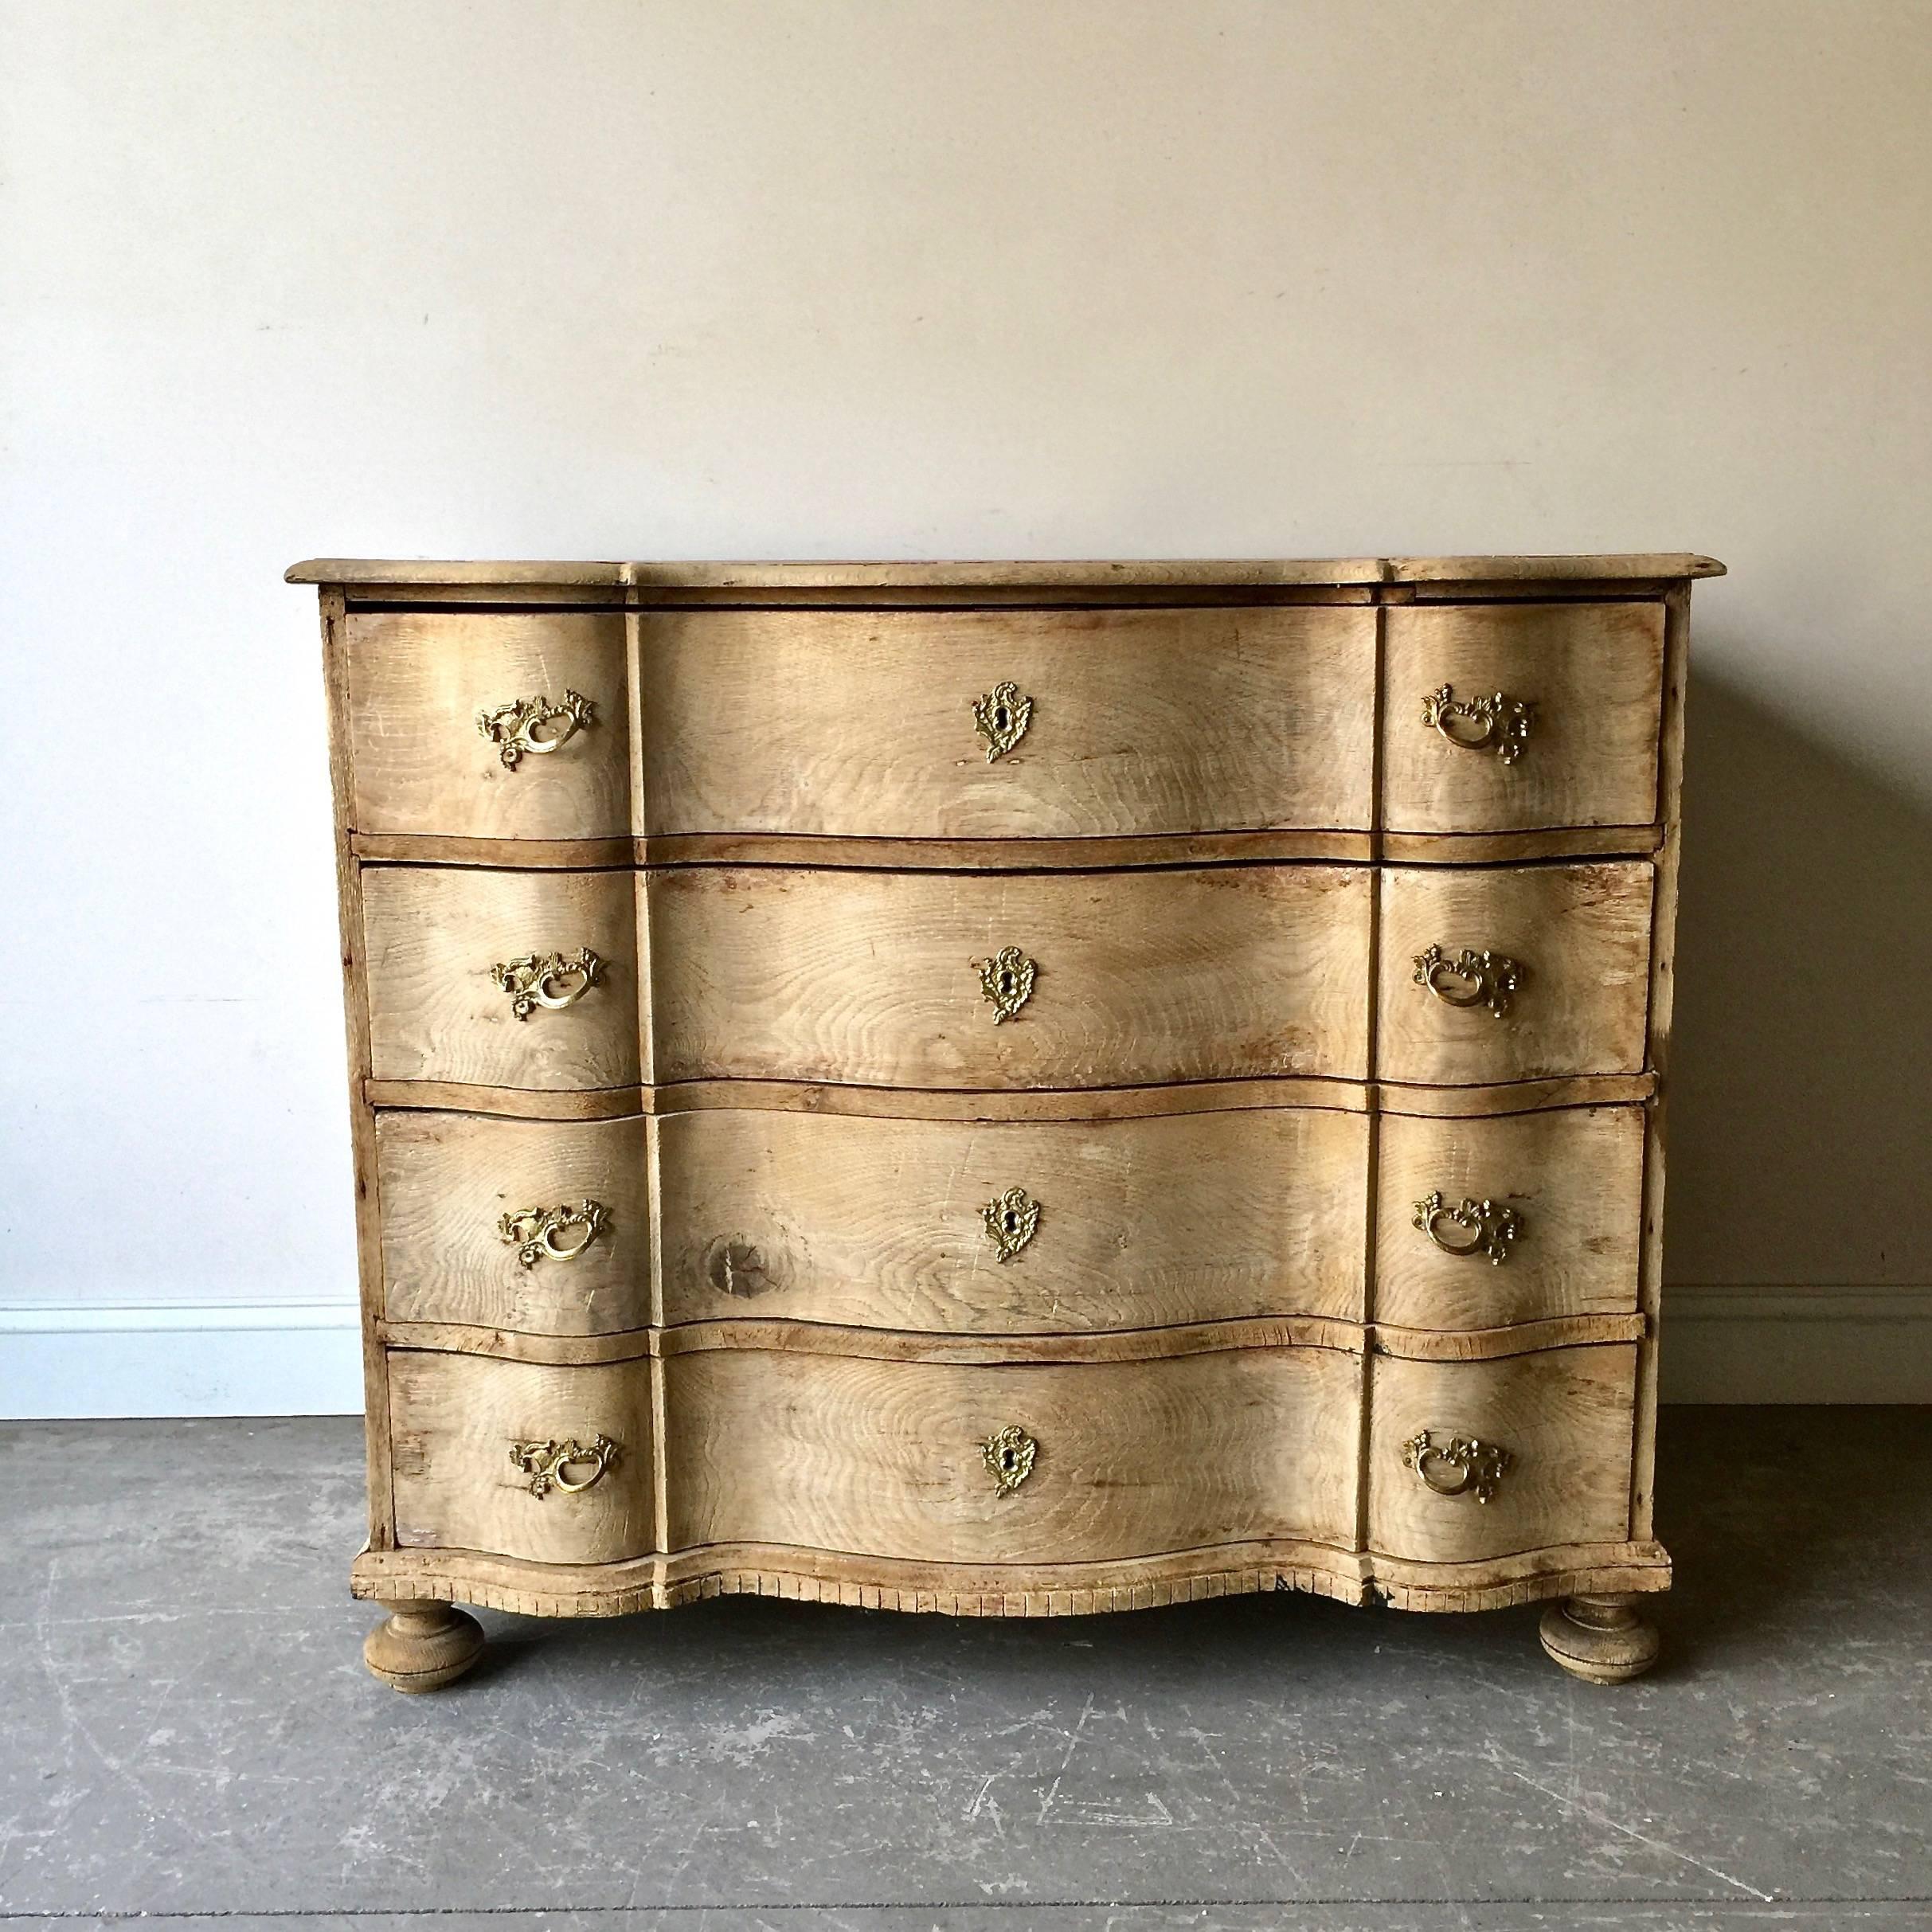 18th century Danish chest with four deep drawers from late Rococo period in richly carved bleached oak with curvaceous serpentine drawer fronts, shaped top and bun feet ... all in brilliant natural oak!
Here are few examples surprising pieces and